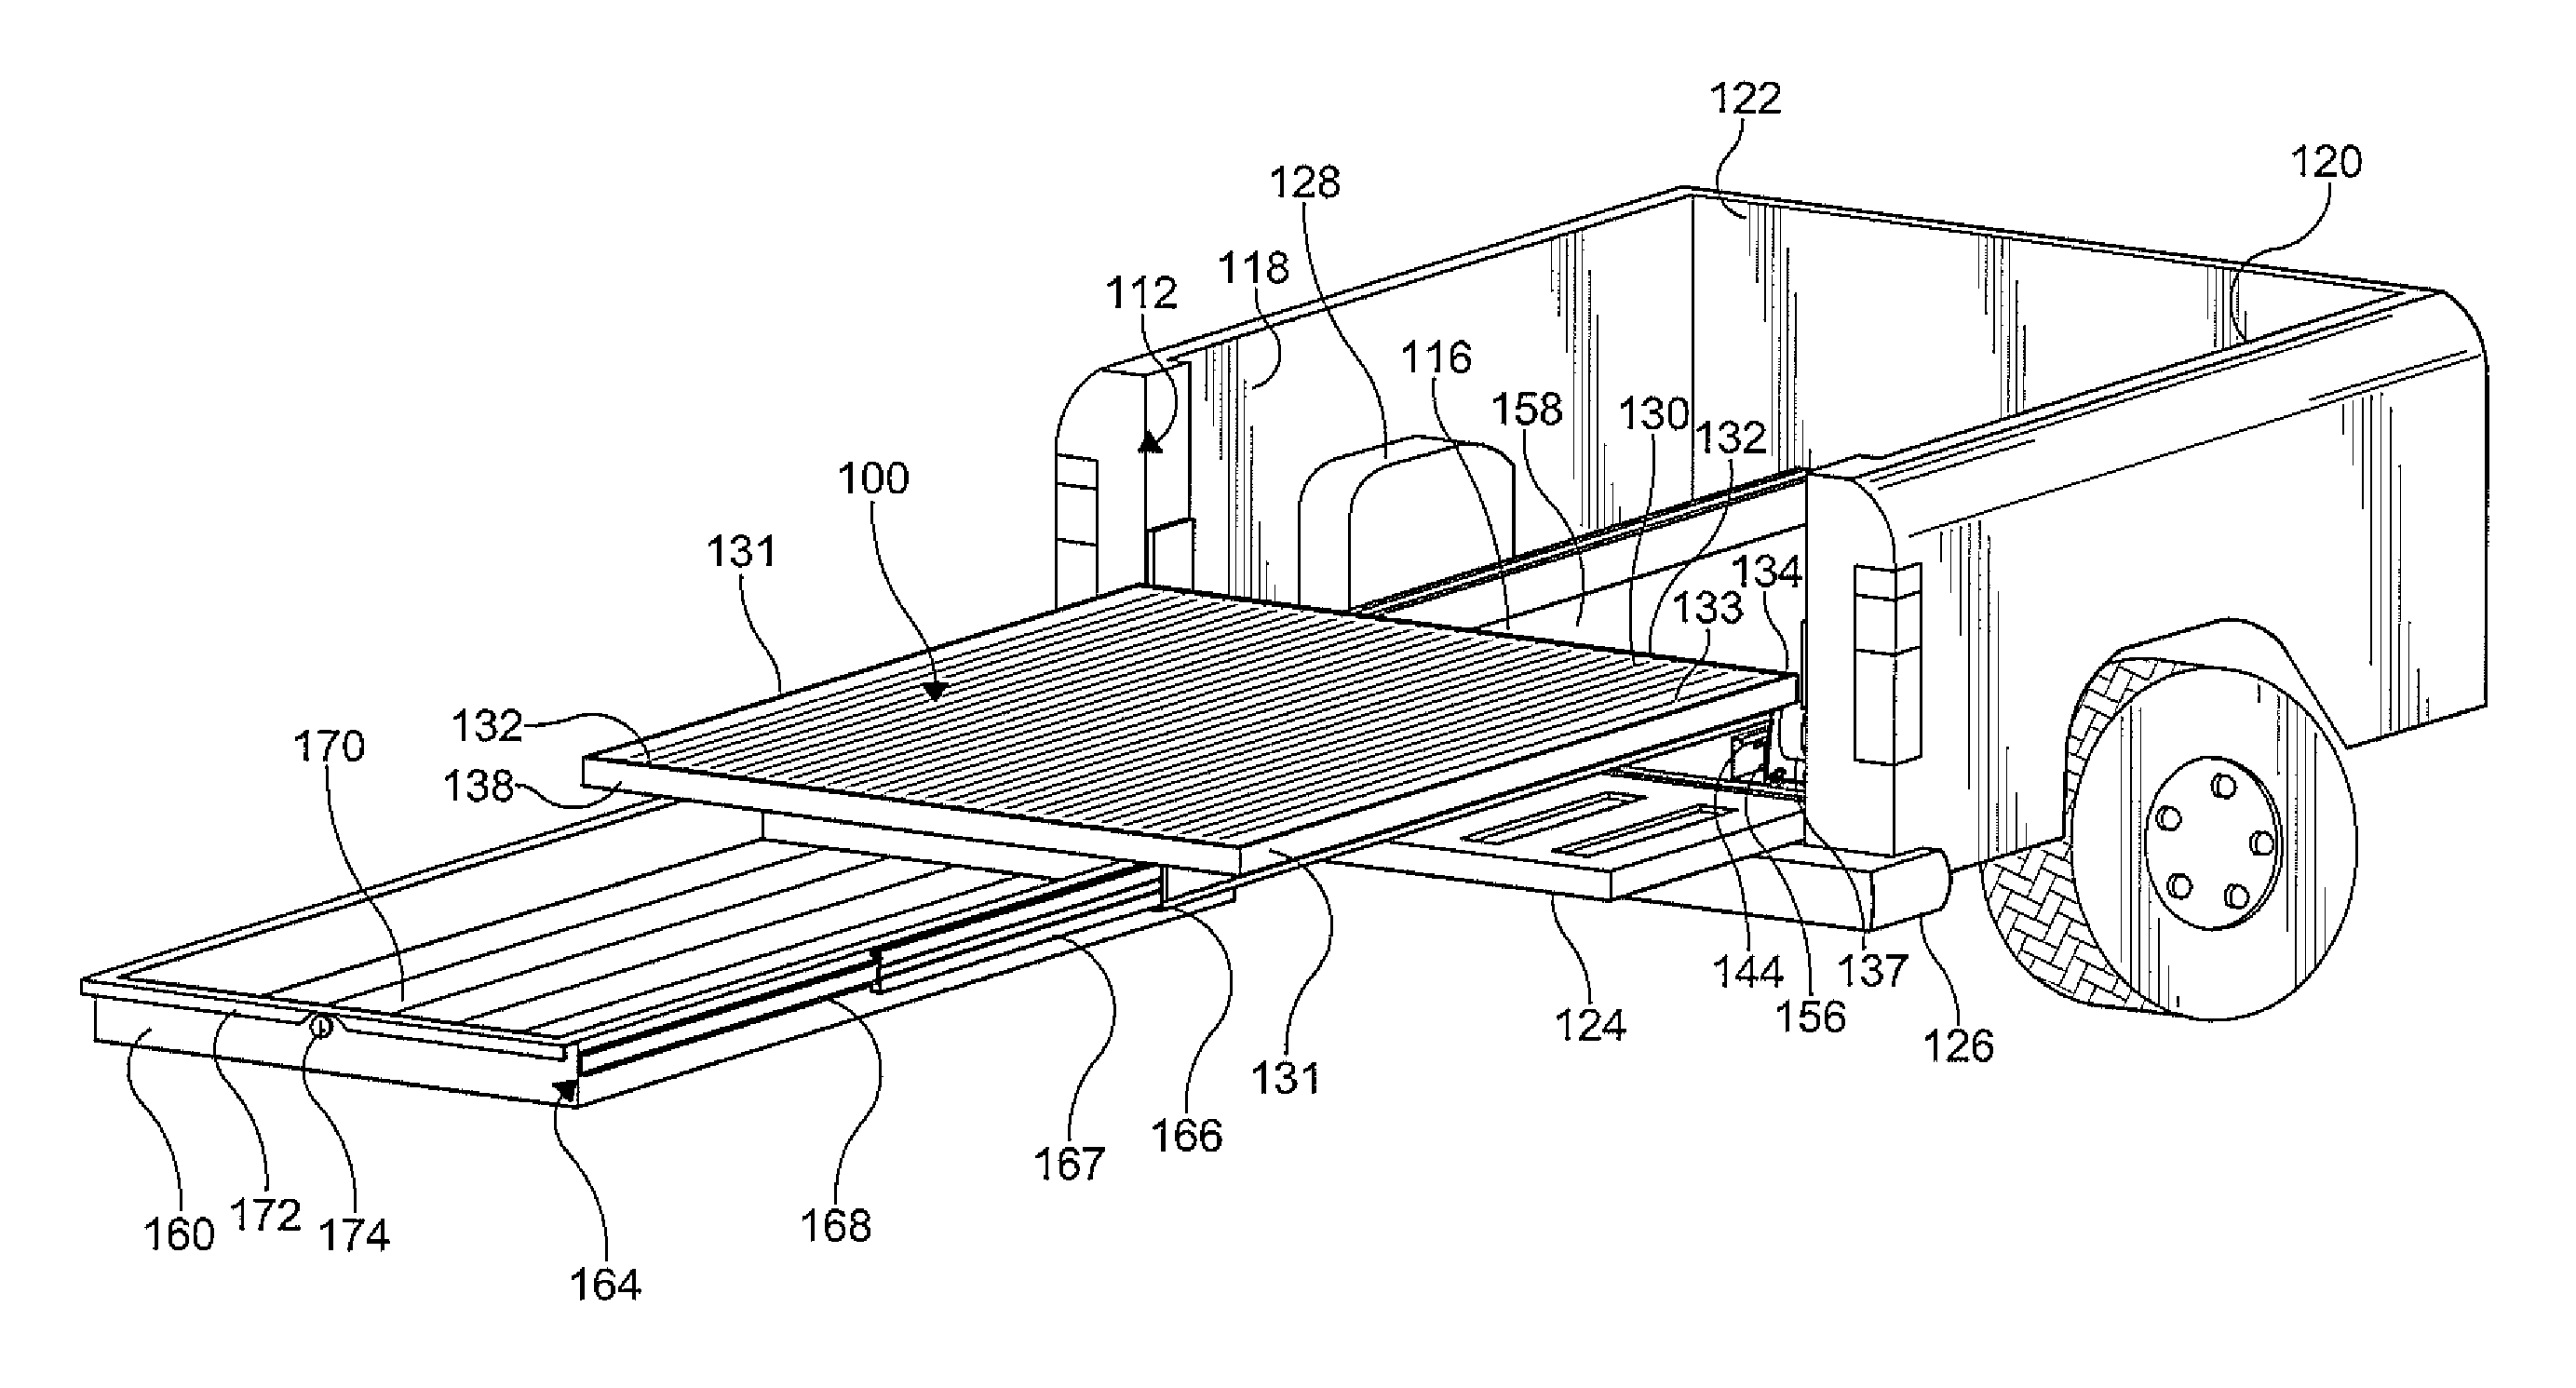 Truck bed extension apparatus